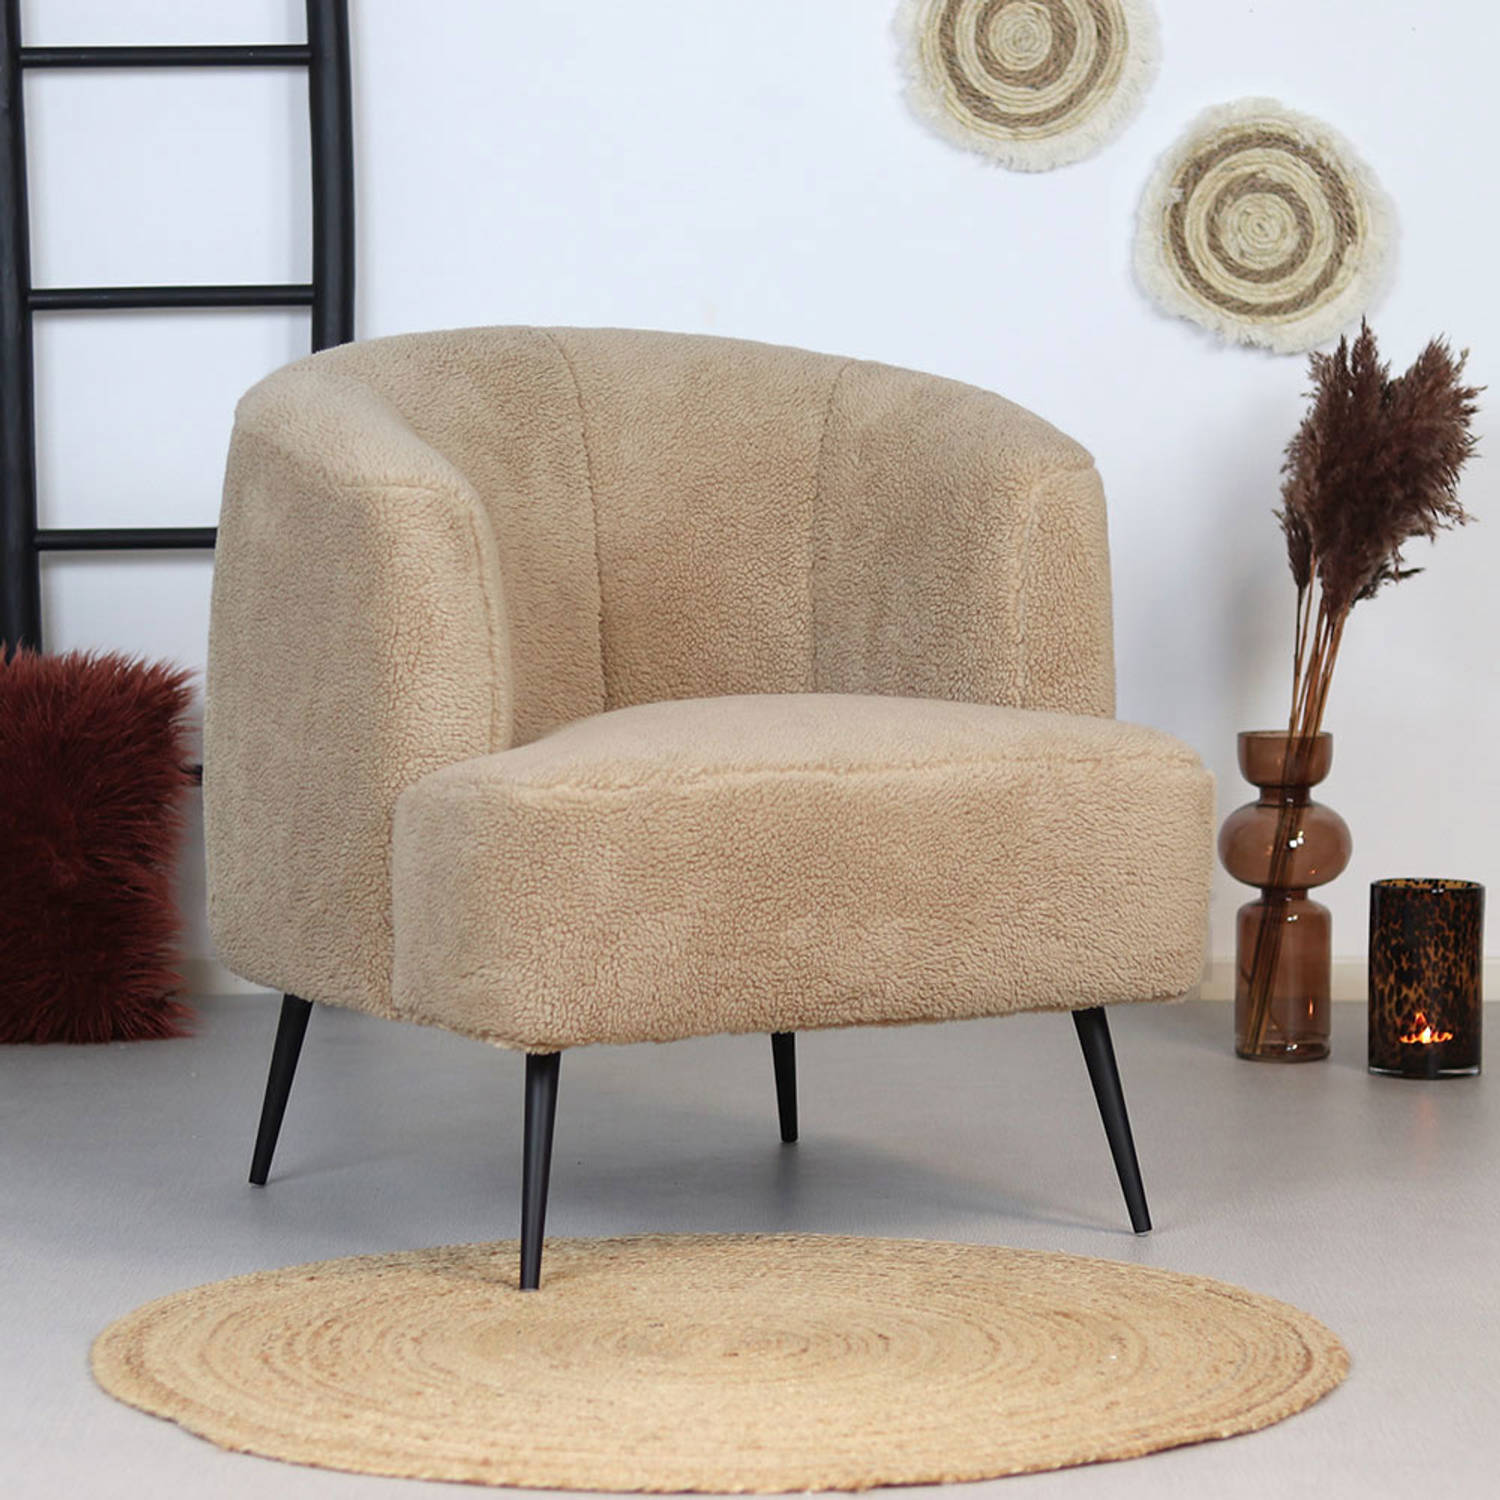 Bronx71 Teddy fauteuil Billy taupe/beige. |